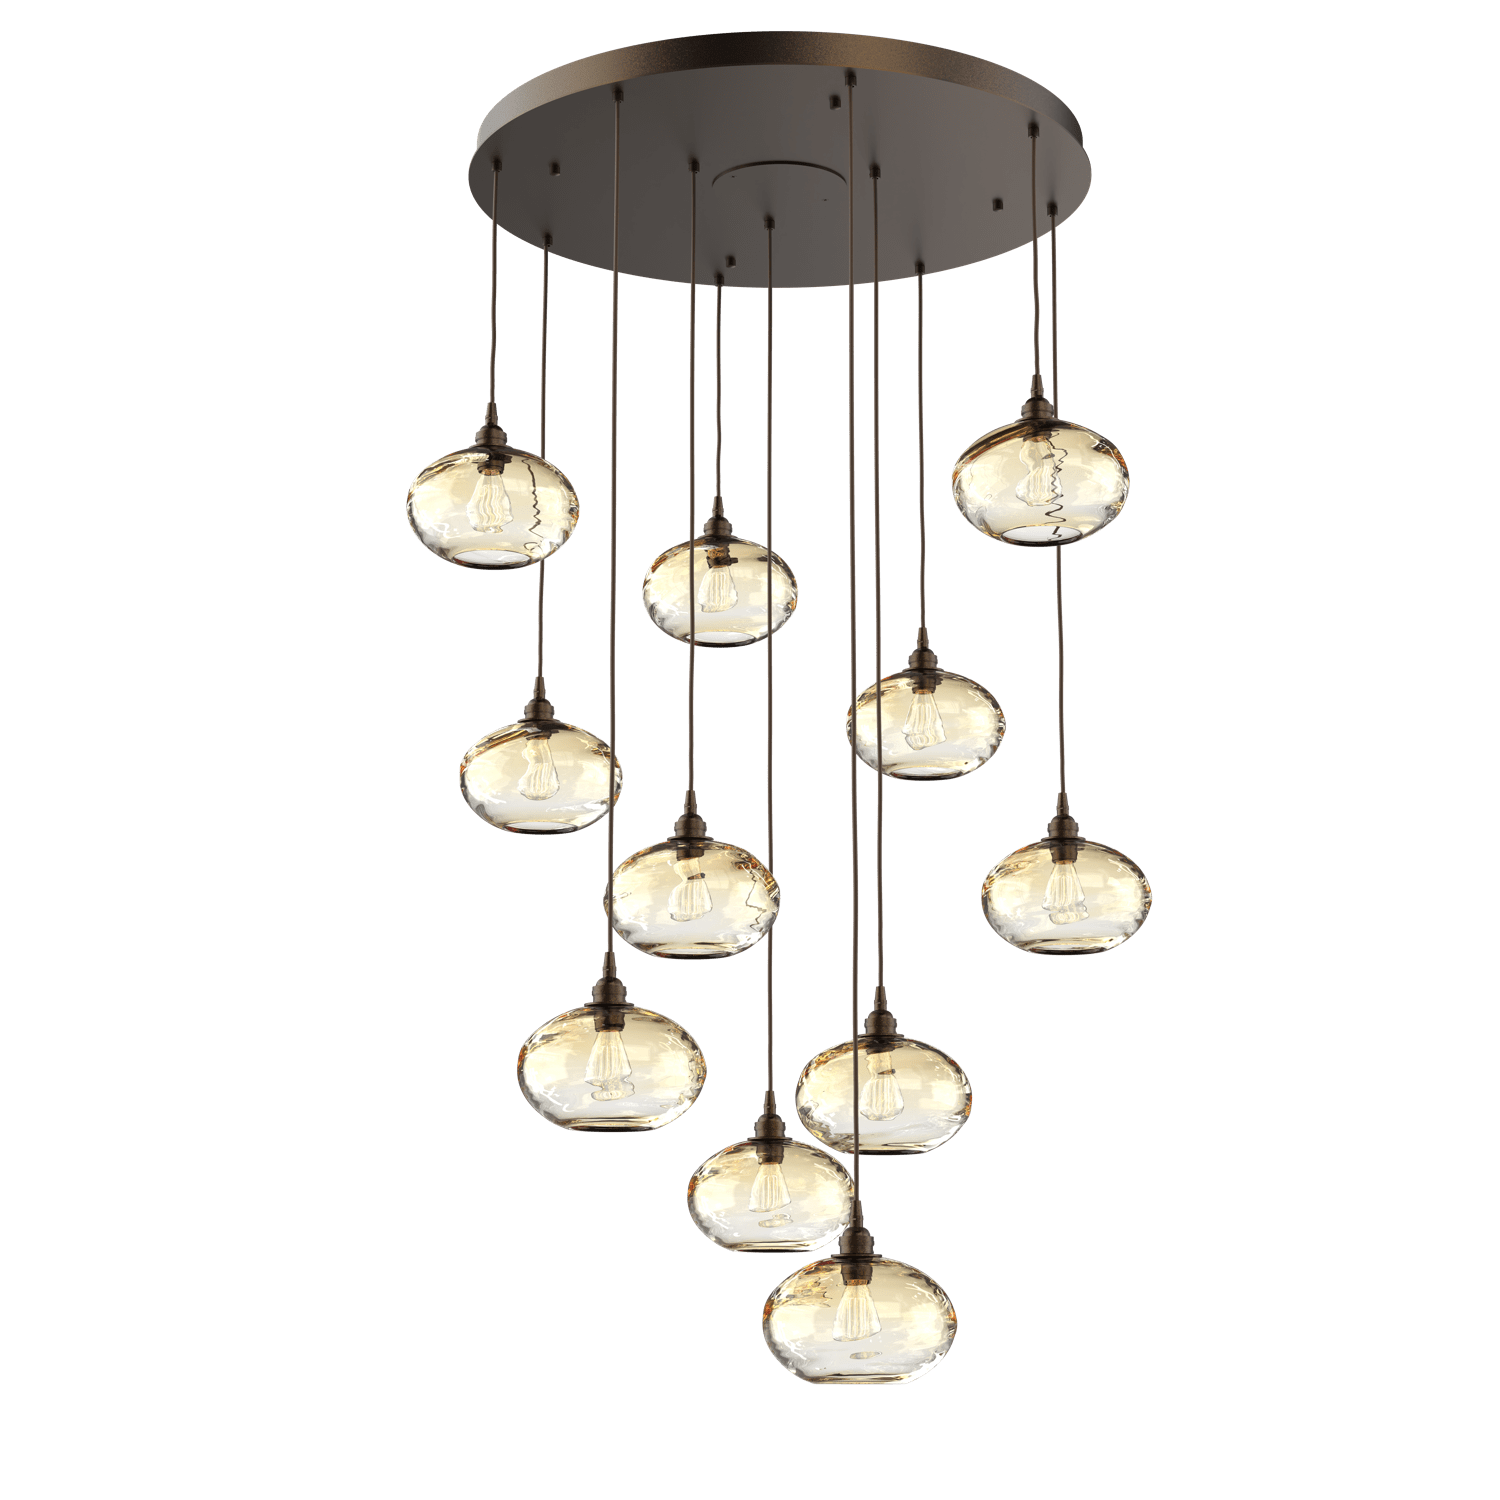 CHB0036-11-FB-OA-Hammerton-Studio-Optic-Blown-Glass-Coppa-11-light-round-pendant-chandelier-with-flat-bronze-finish-and-optic-amber-blown-glass-shades-and-incandescent-lamping